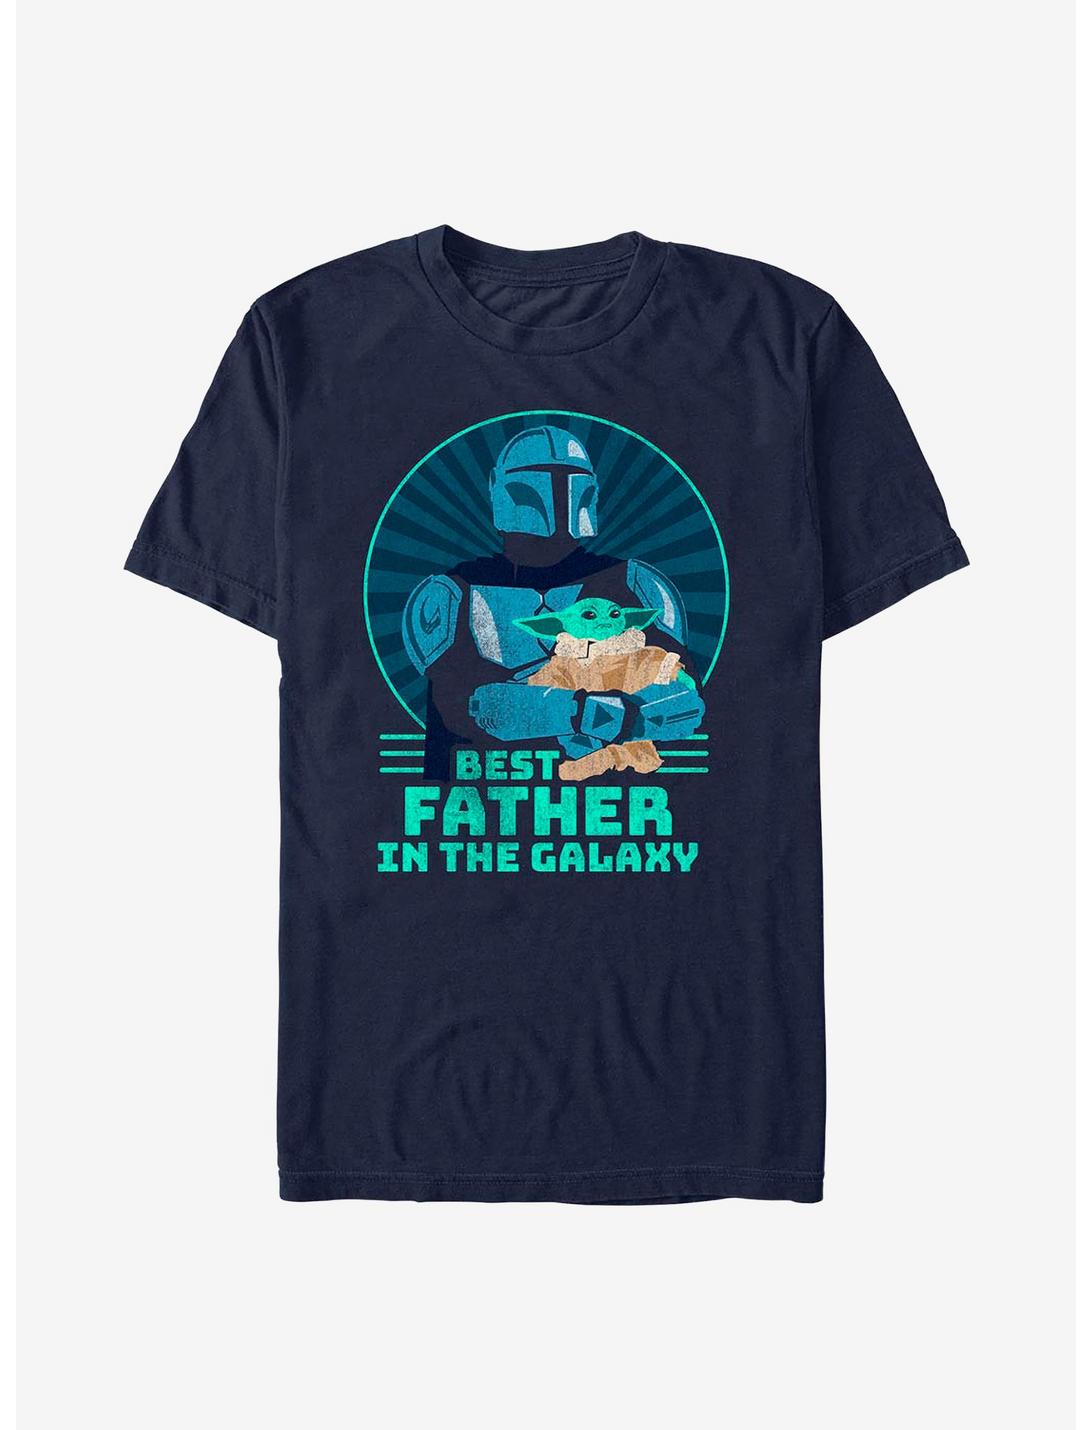 Star Wars The Mandalorian Best Father In The Galaxy T-Shirt, NAVY, hi-res